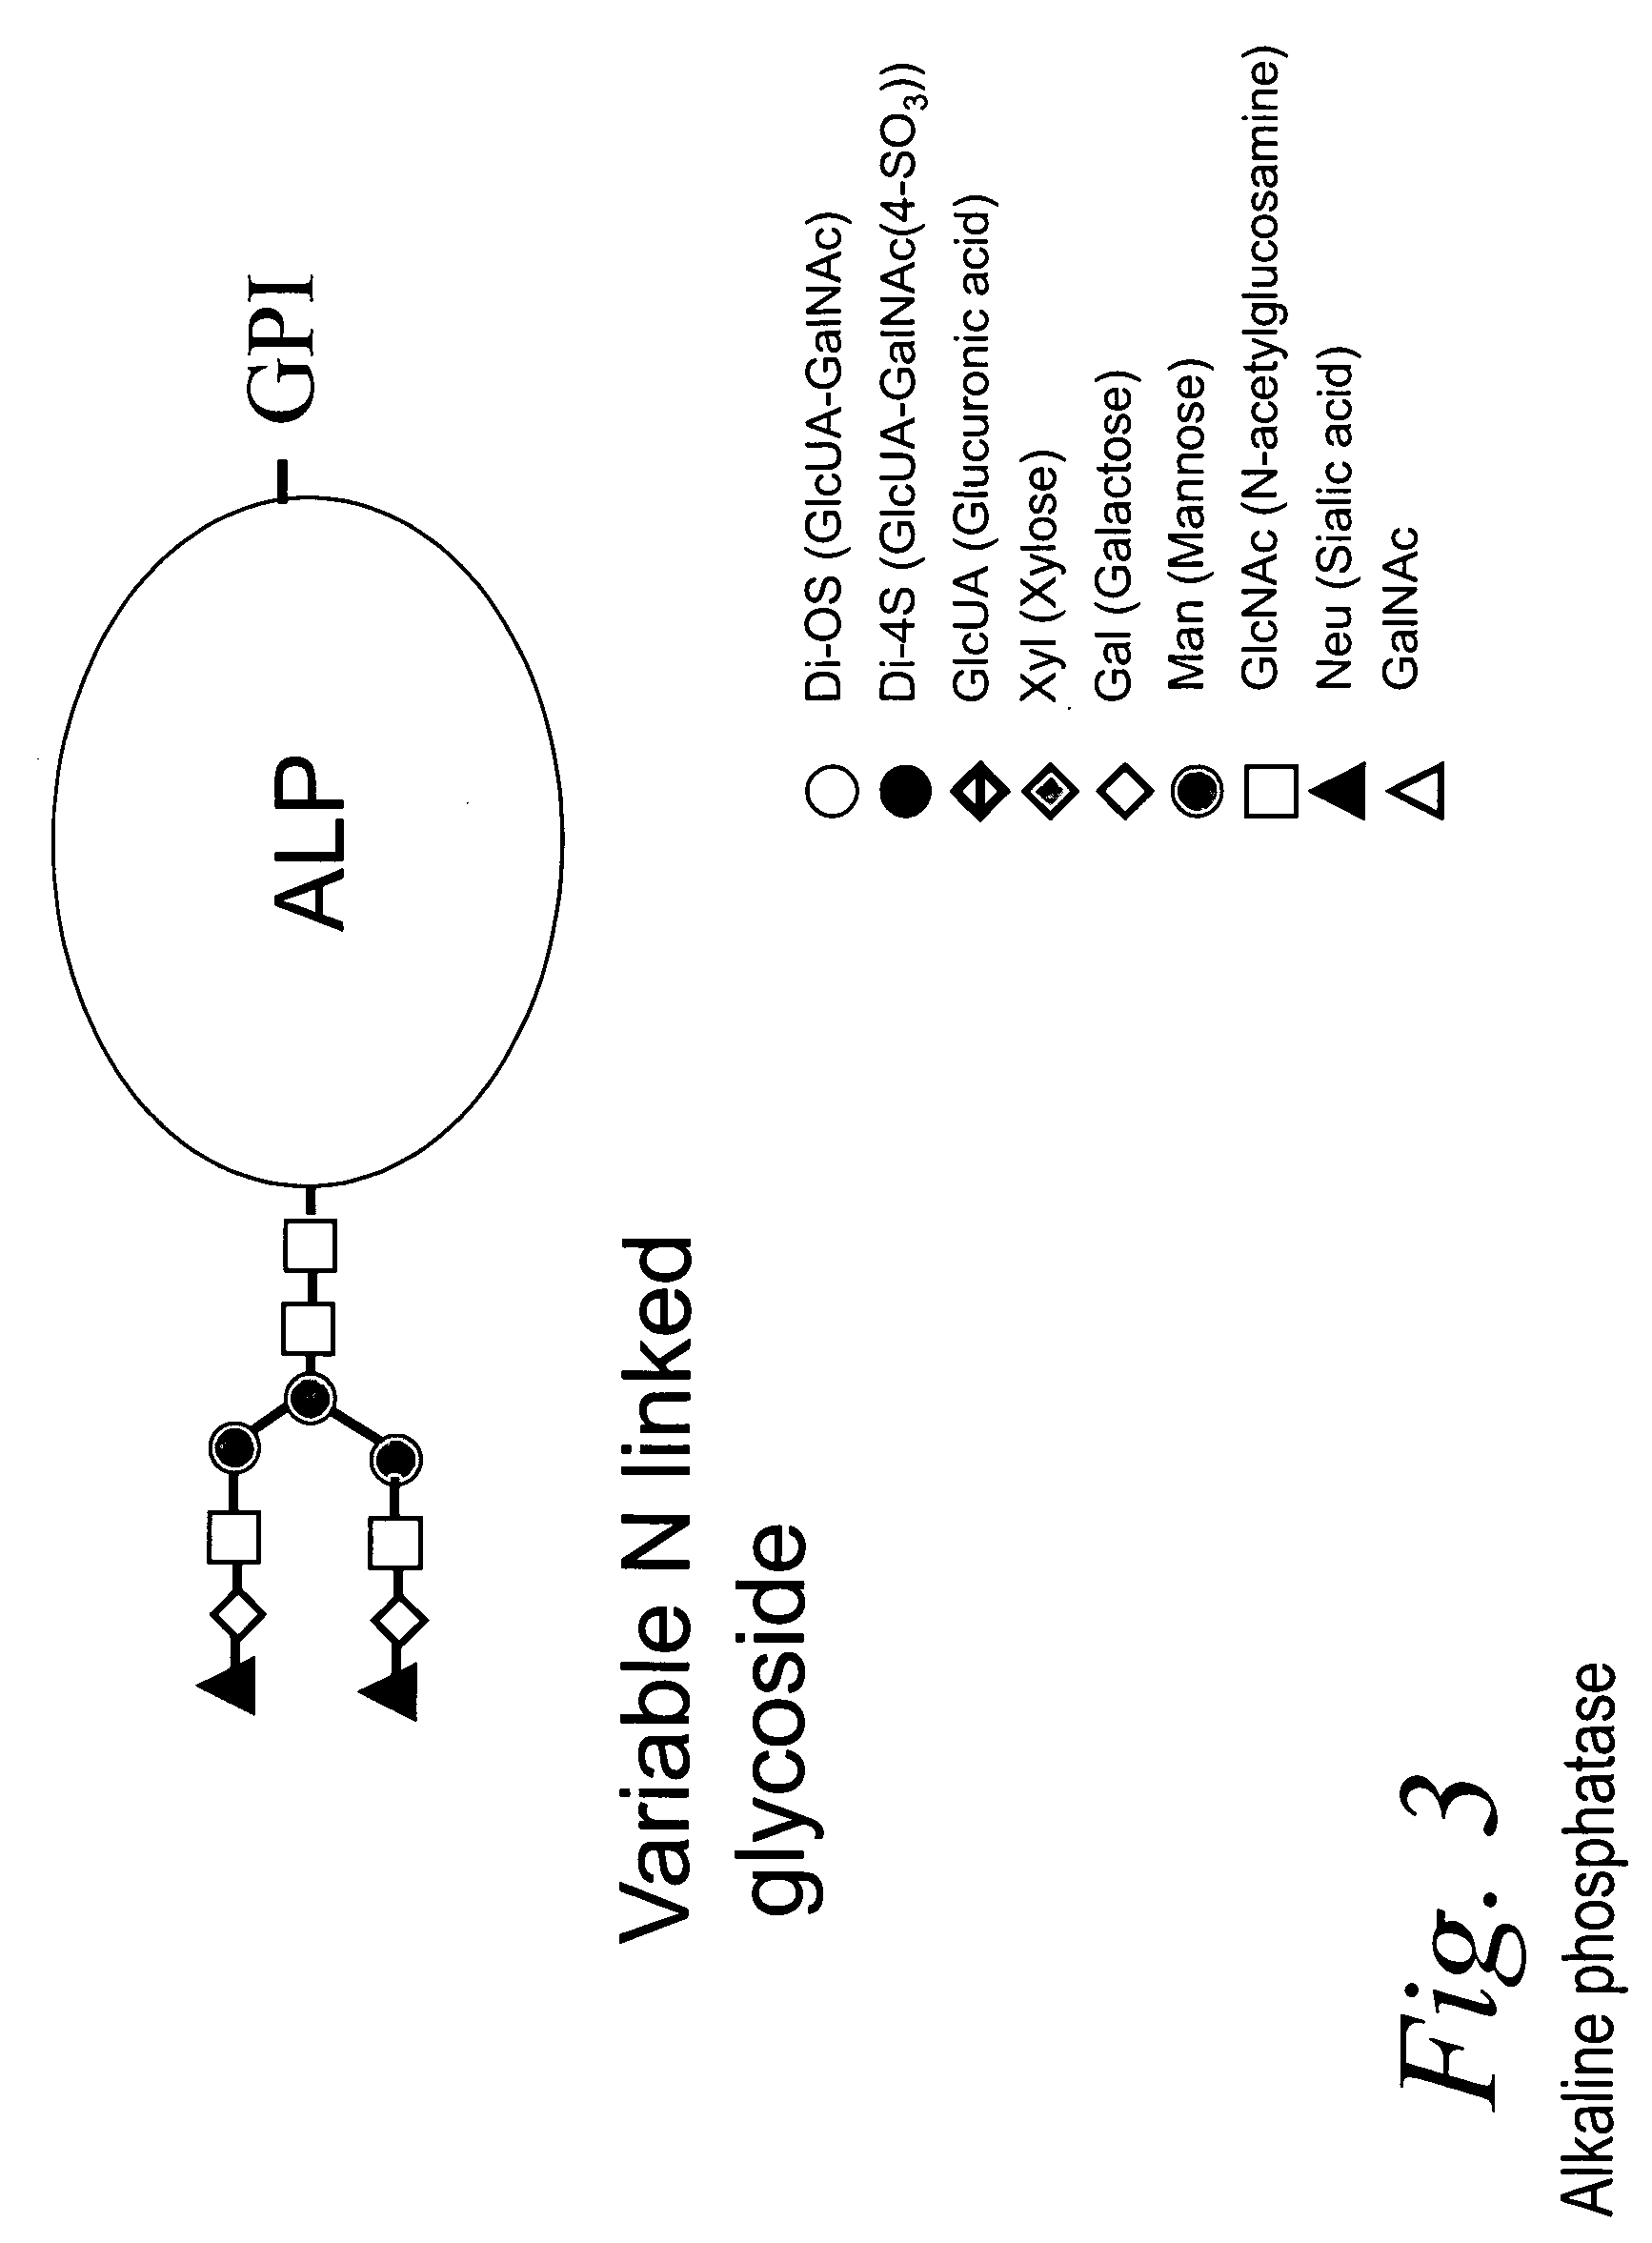 Bacterial test method by glycated label binding